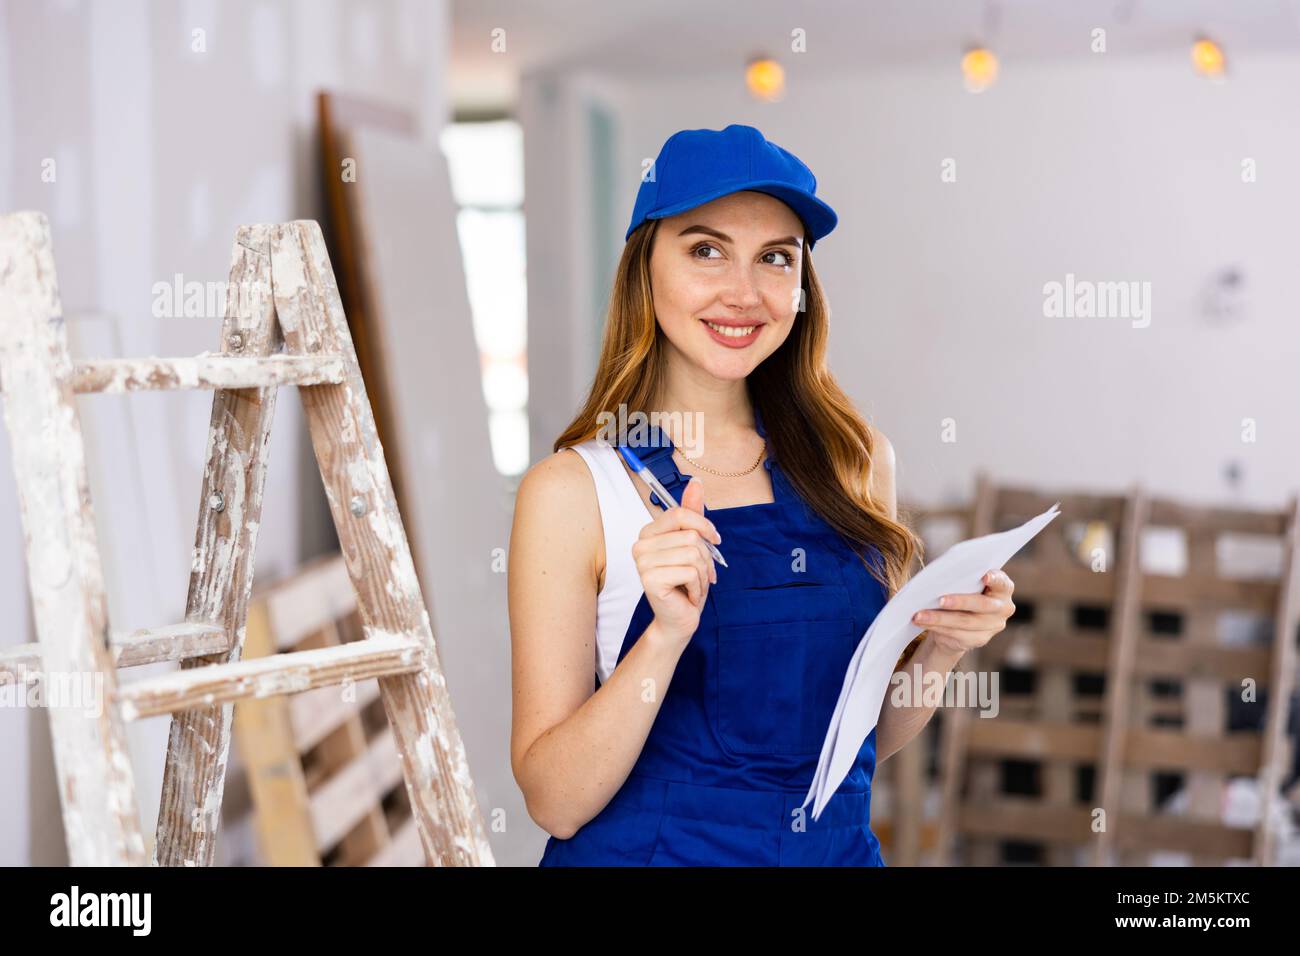 Smiling female builder contractor with papers at construction site Stock Photo